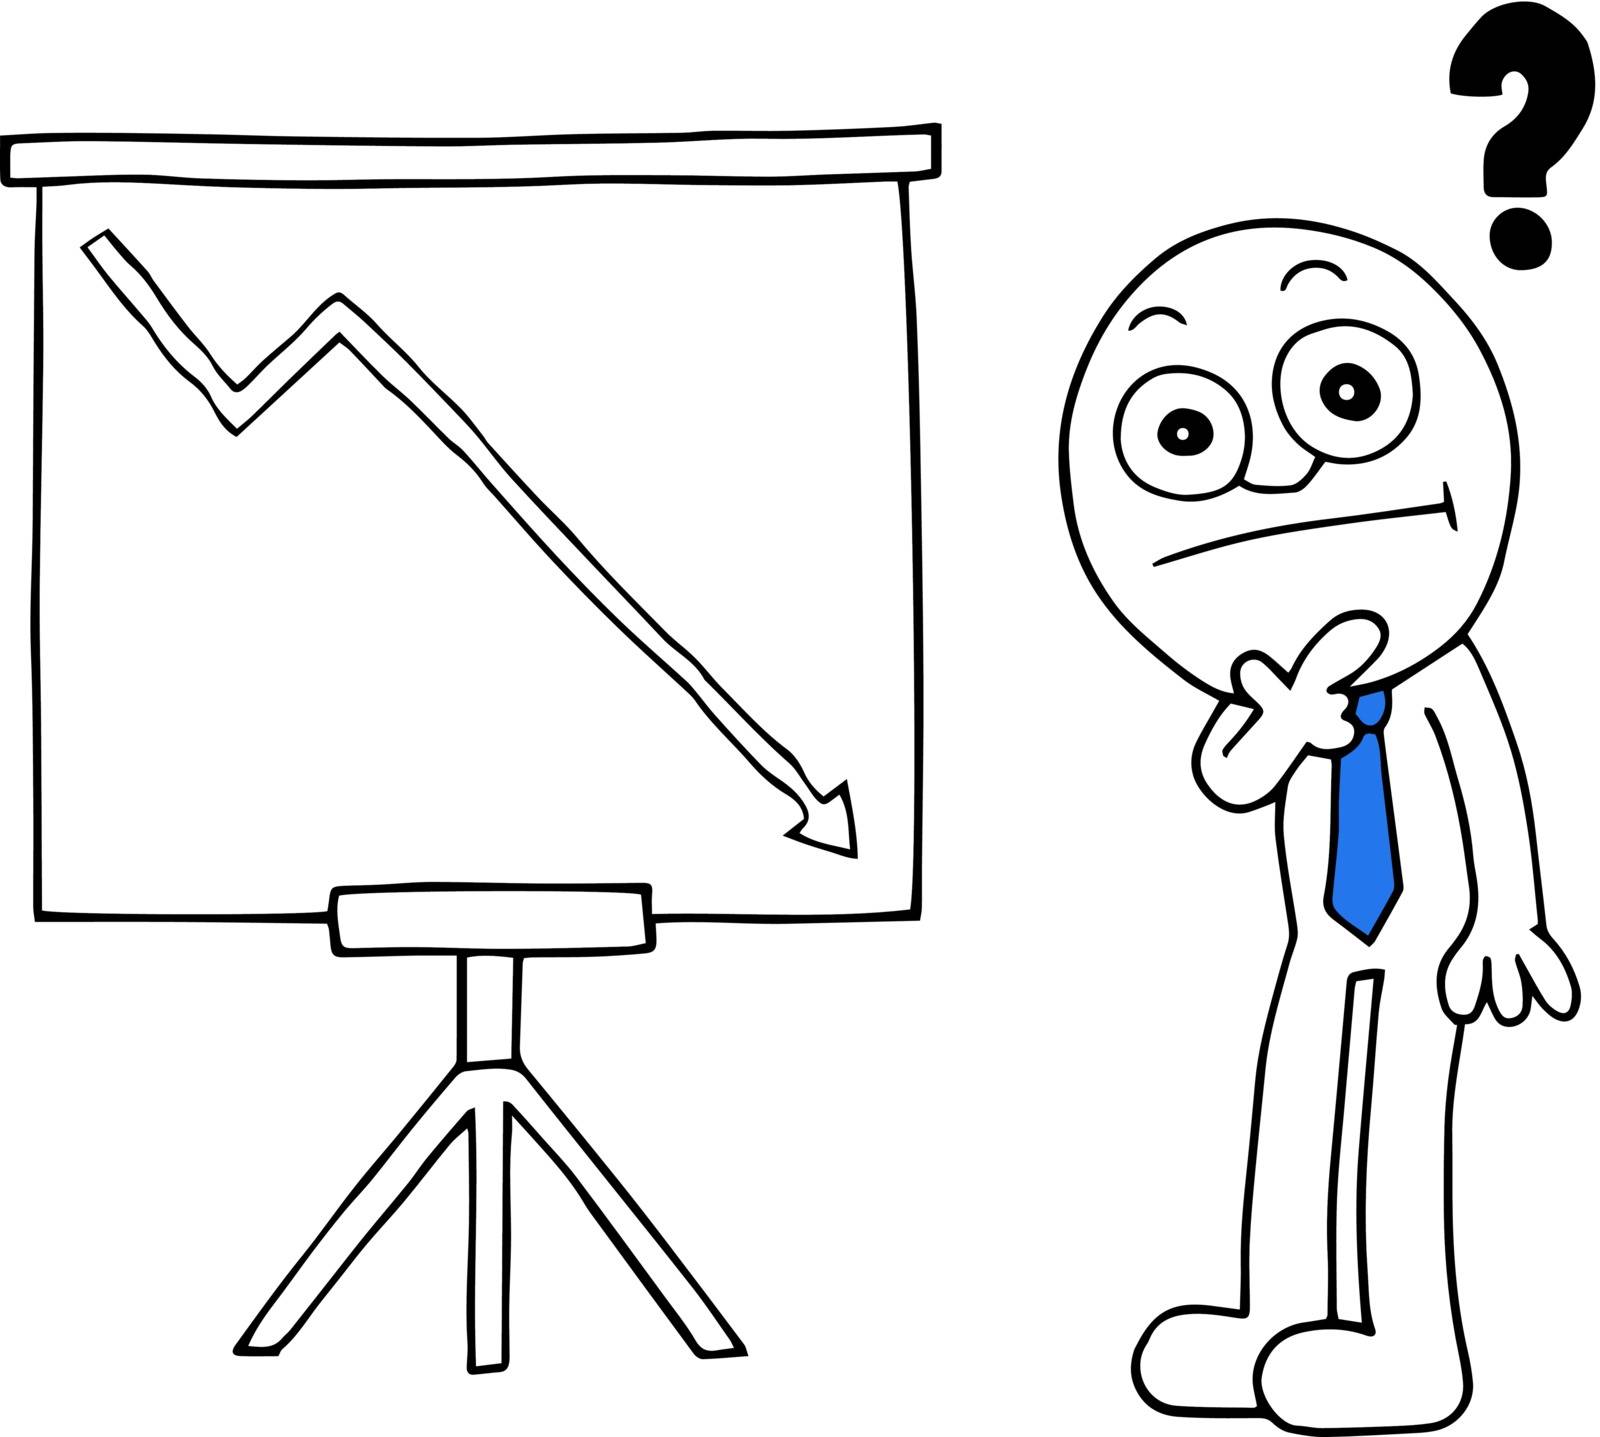 Hand drawn cartoon businessman thinking with a question mark and standing sales chart arrow going down symbolizing loss.